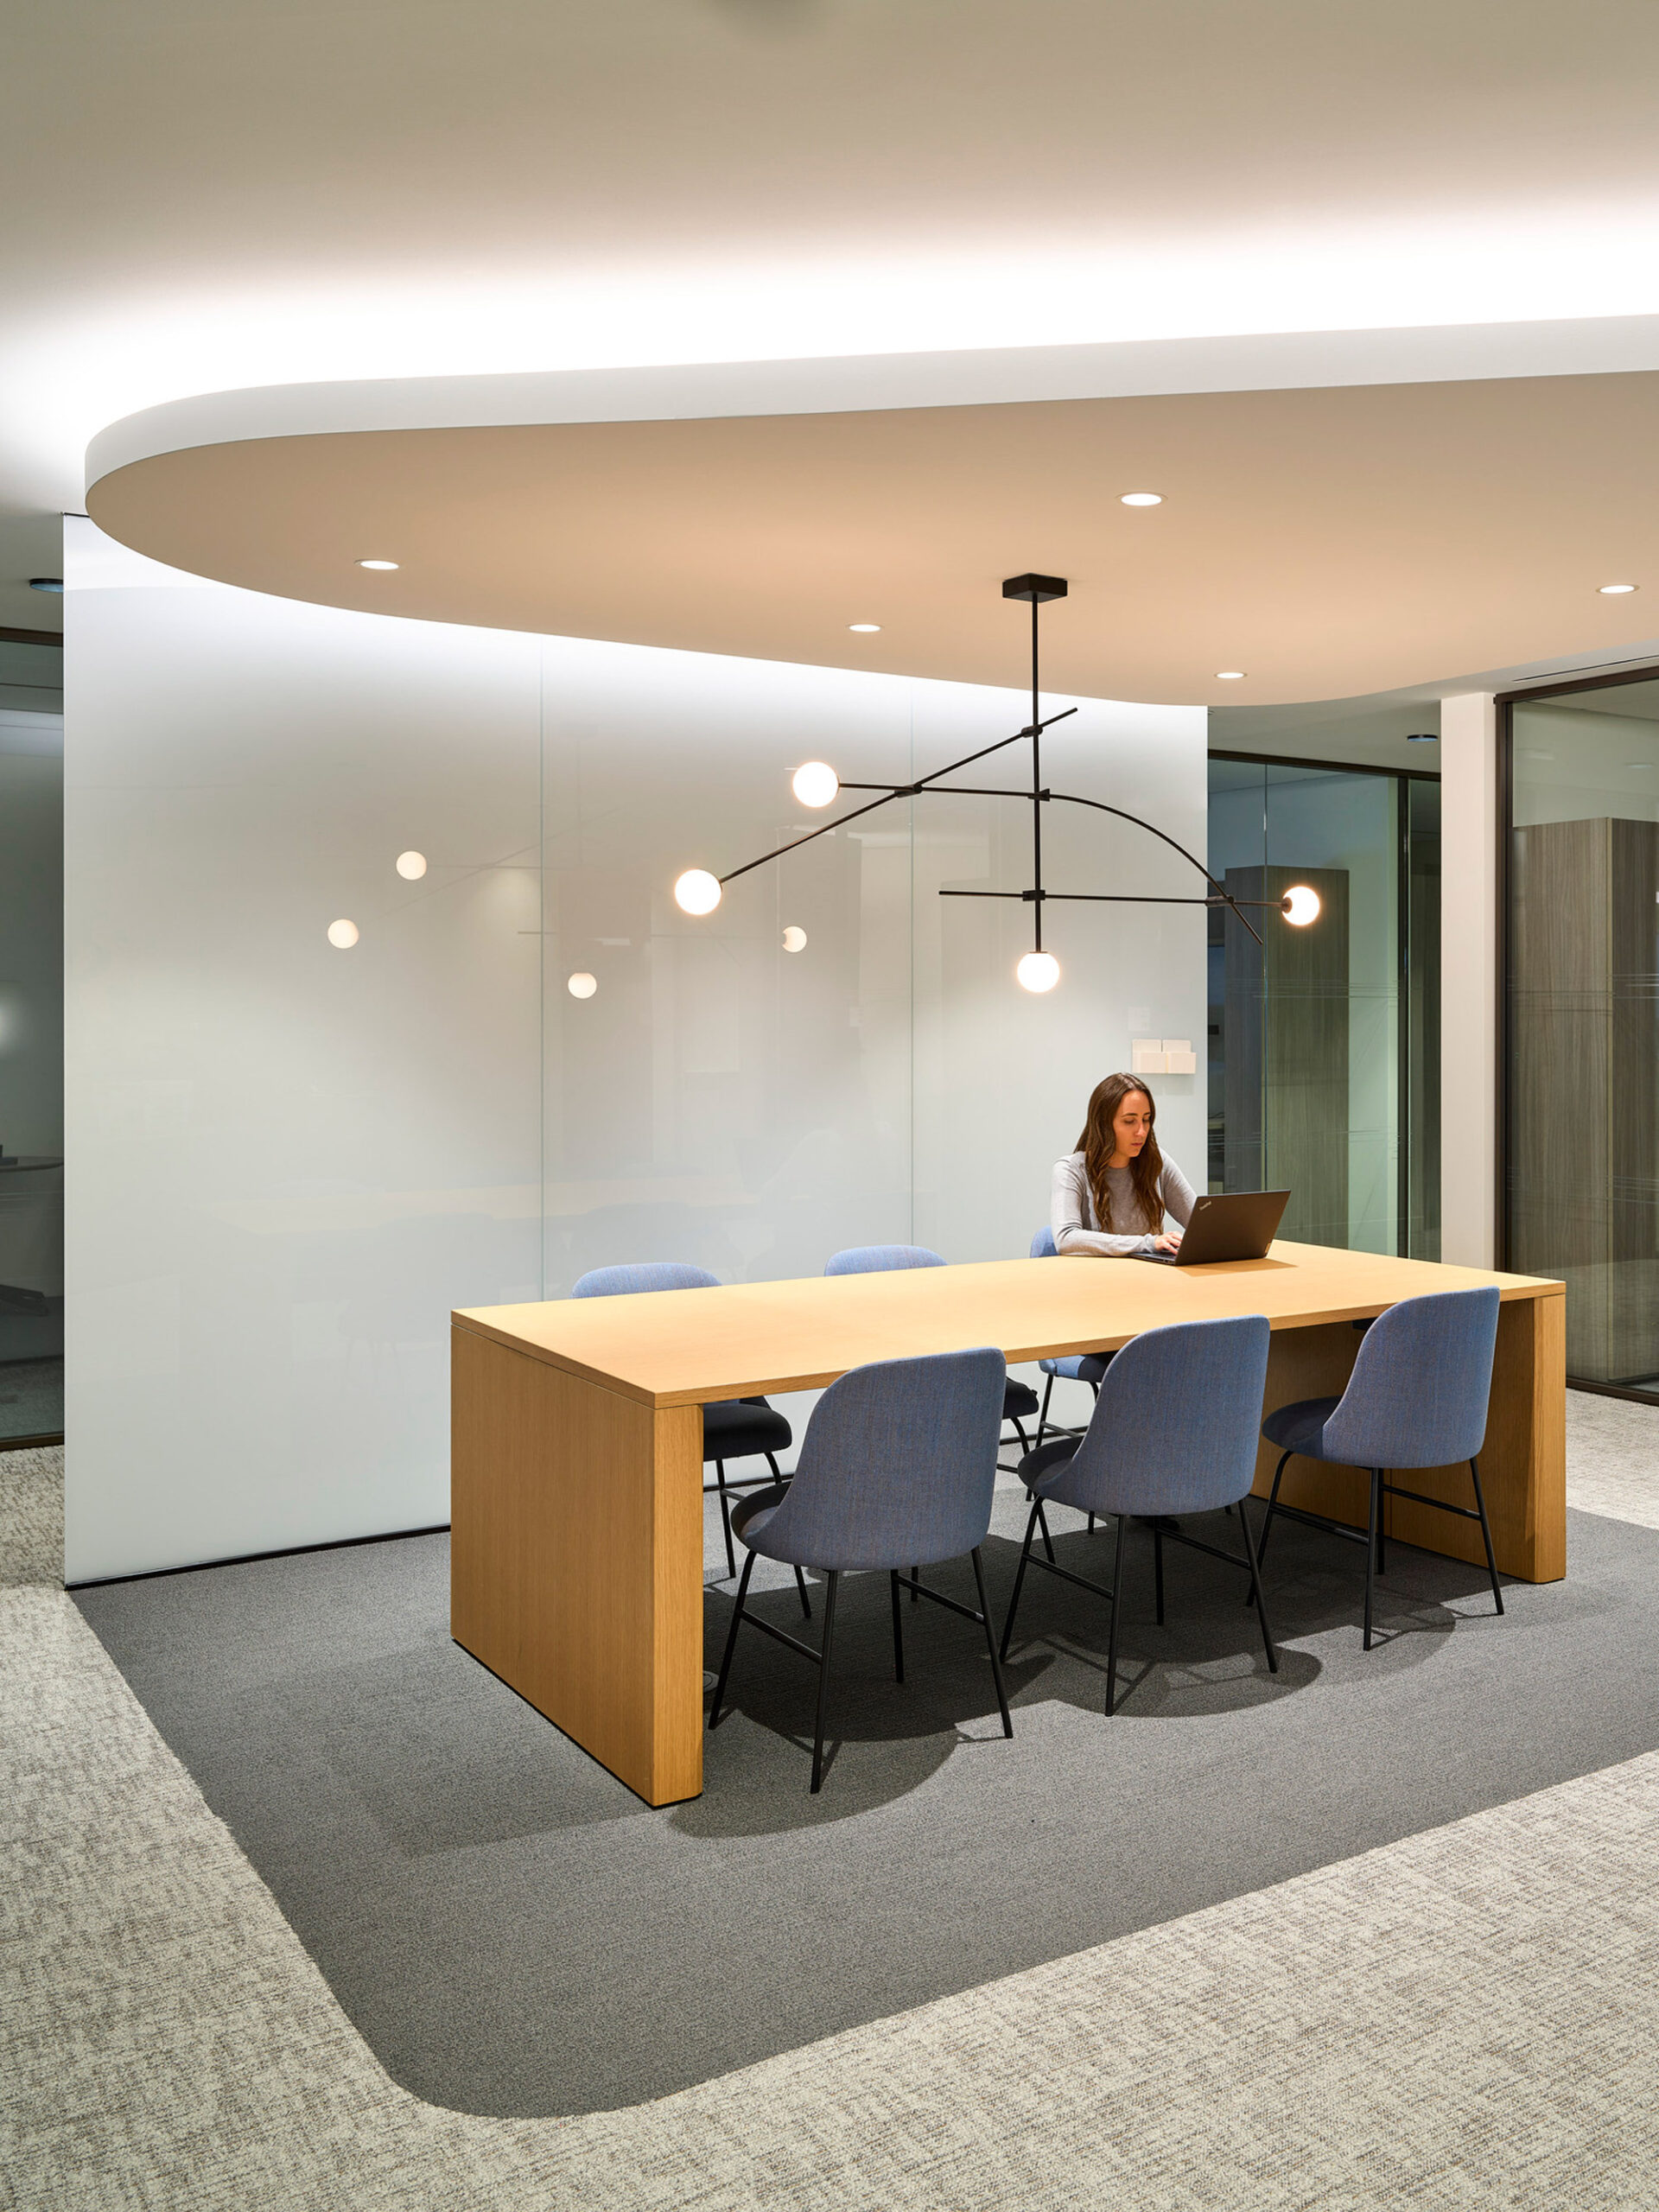 Modern office meeting space highlighted by an organic-shaped, floating ceiling panel and sleek pendant lighting. A central wooden table surrounded by blue upholstered chairs occupies the room, with a solitary professional working on a laptop, enhancing a focused yet collaborative ambiance.